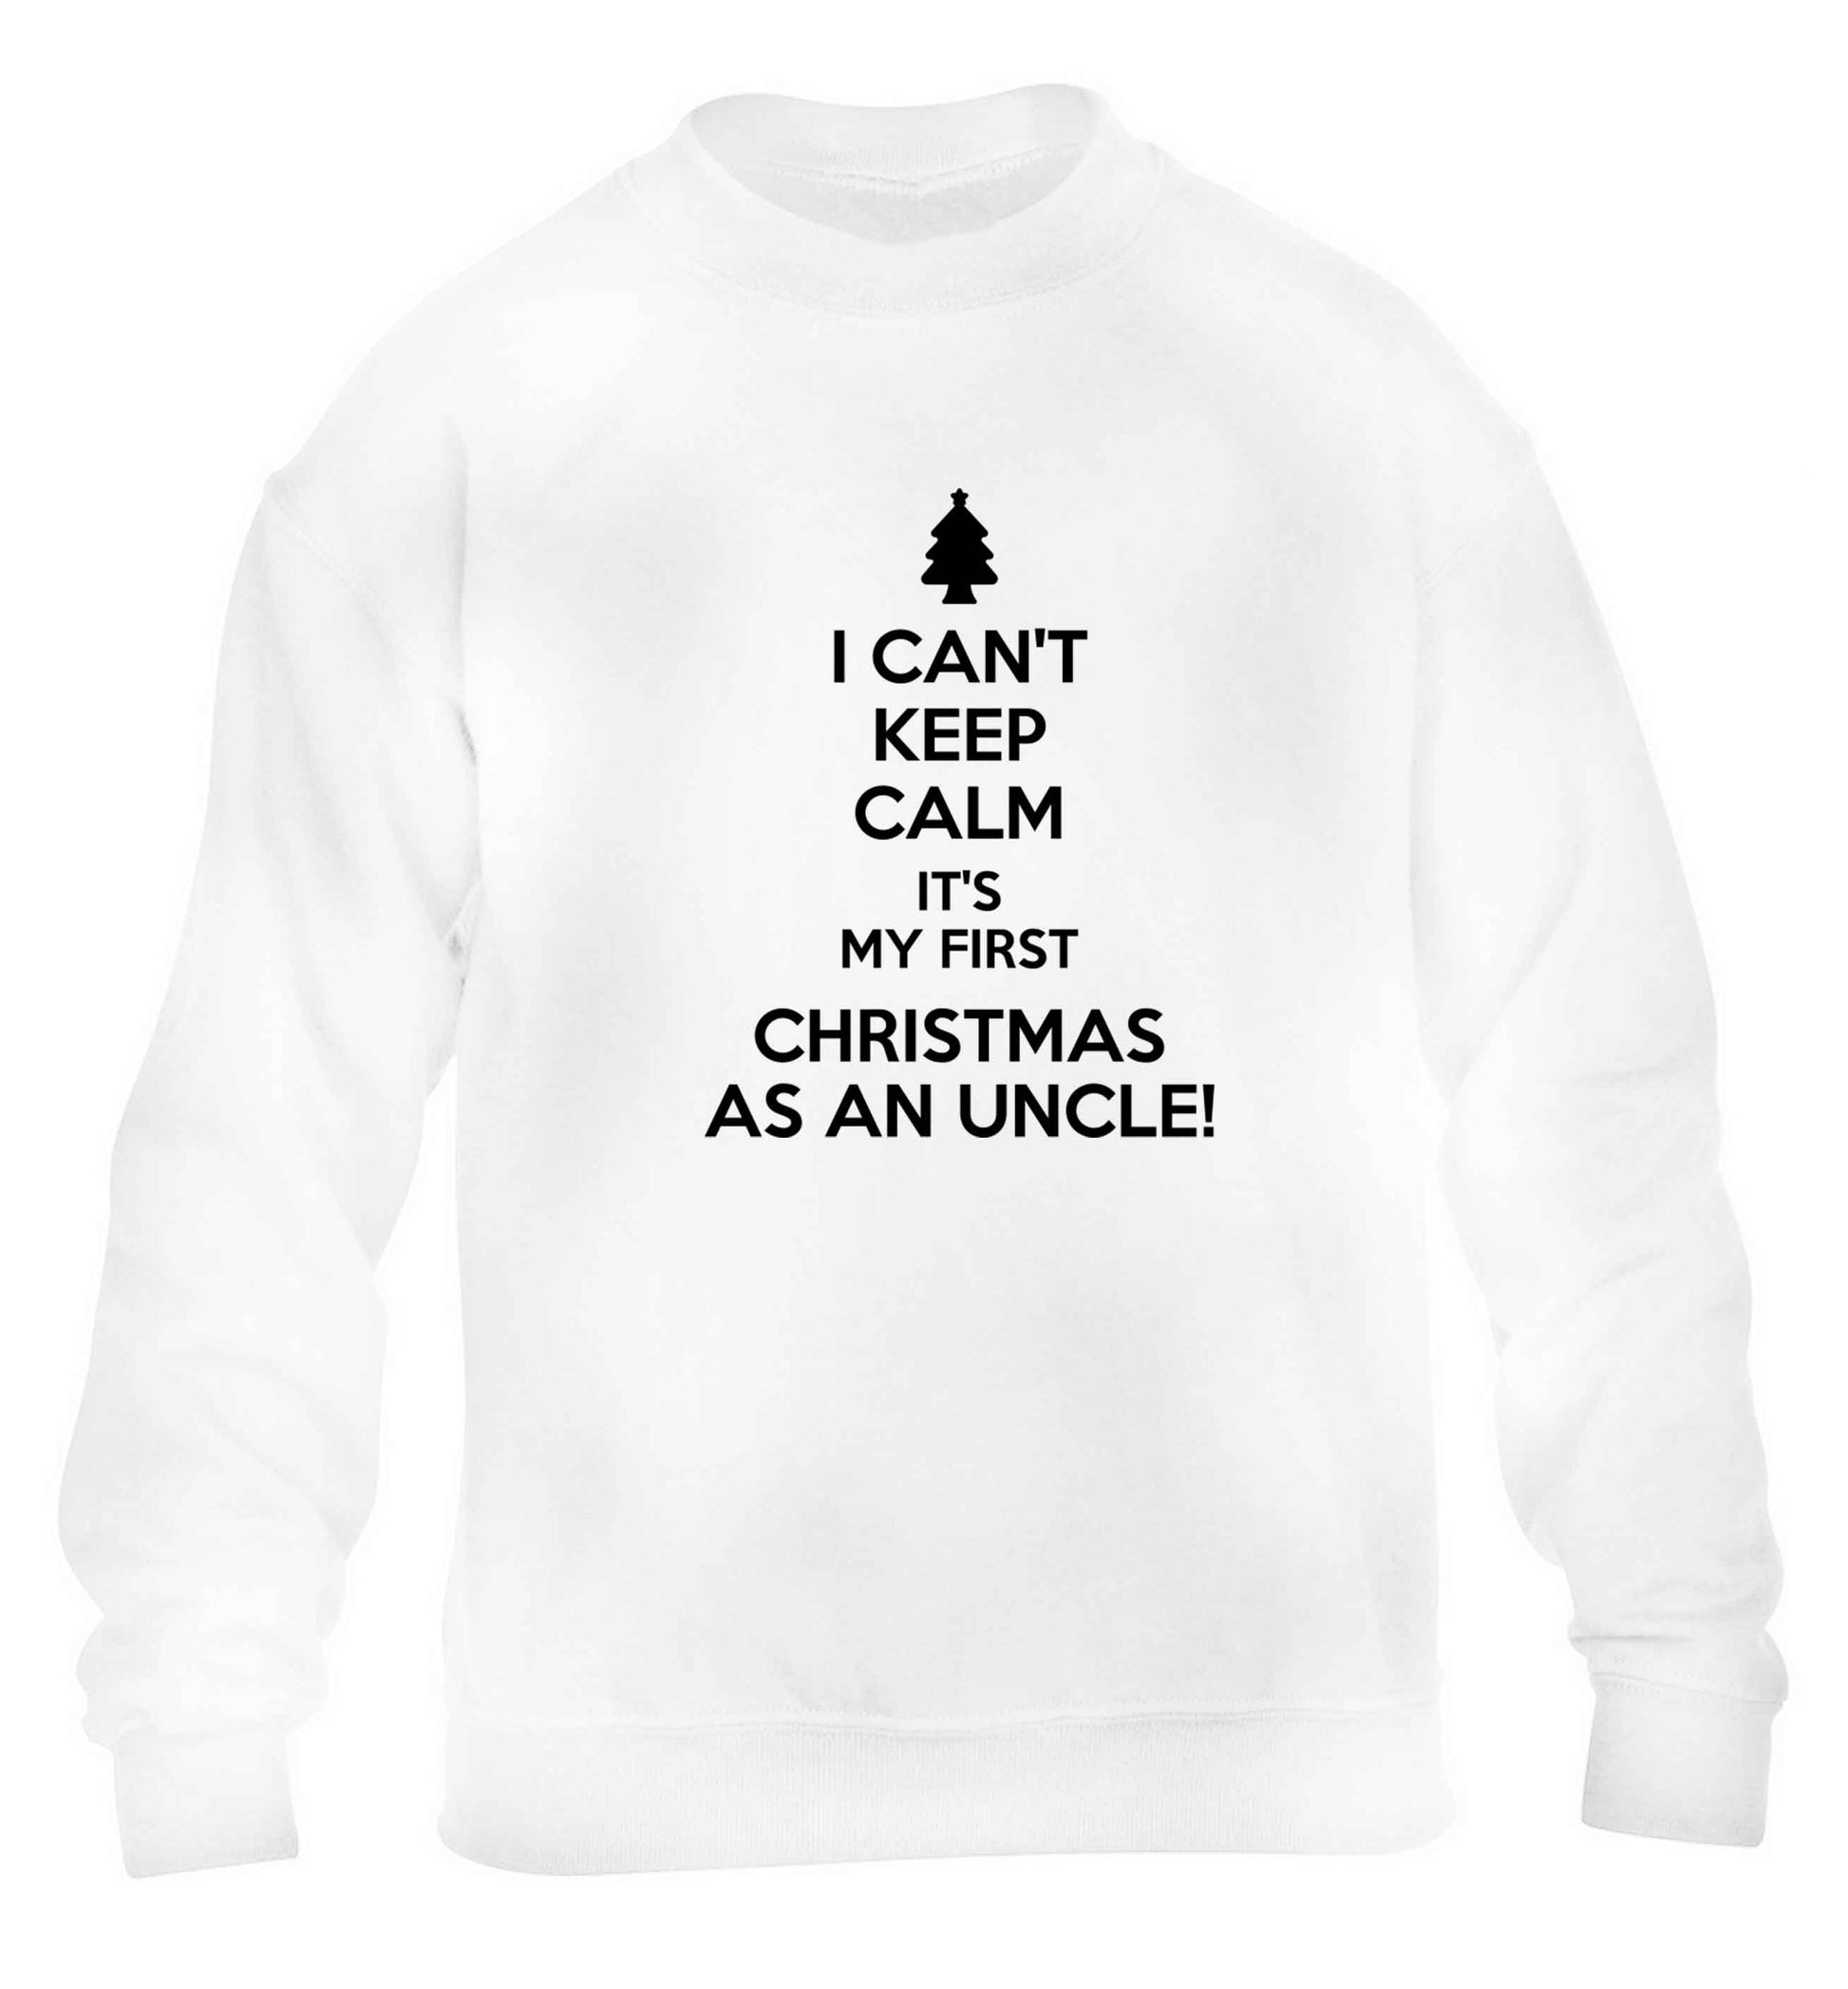 I can't keep calm it's my first Christmas as an uncle! children's white sweater 12-13 Years